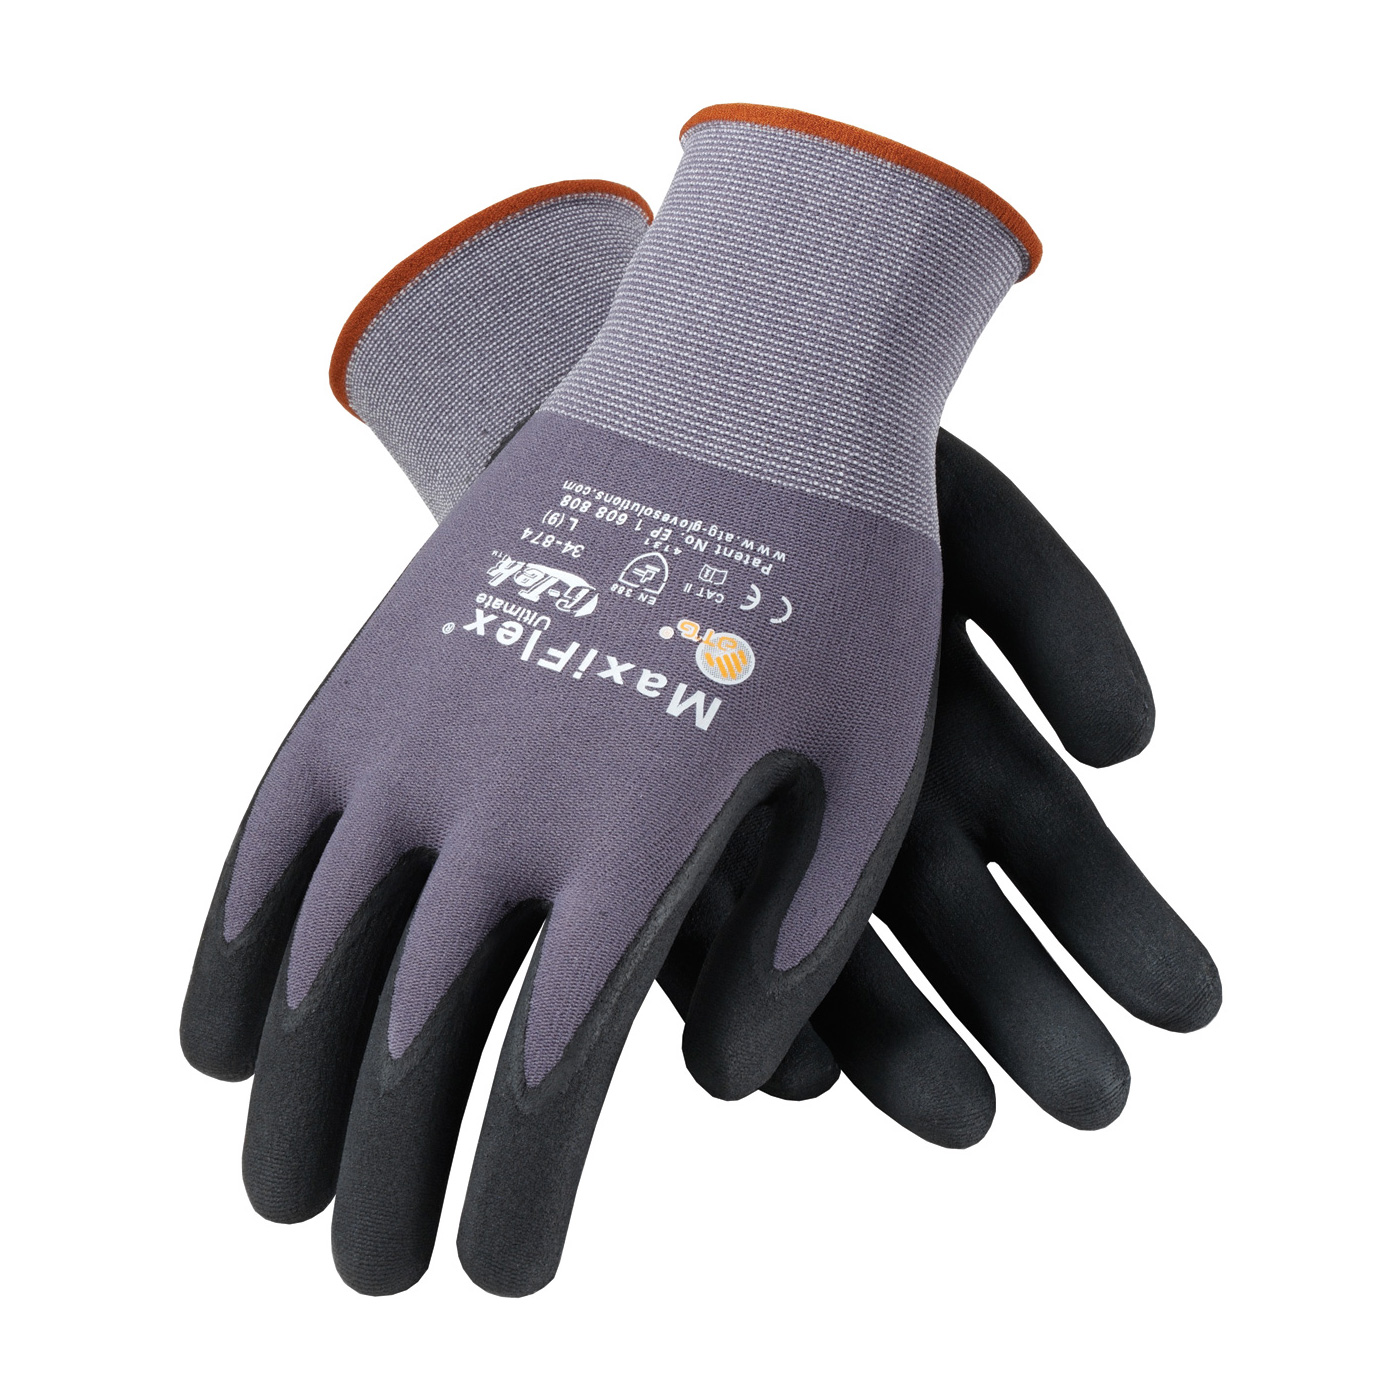 GLOVE NYLON/LYCRA FOAM;NITRILE PALM ULTIMATE - Latex, Supported